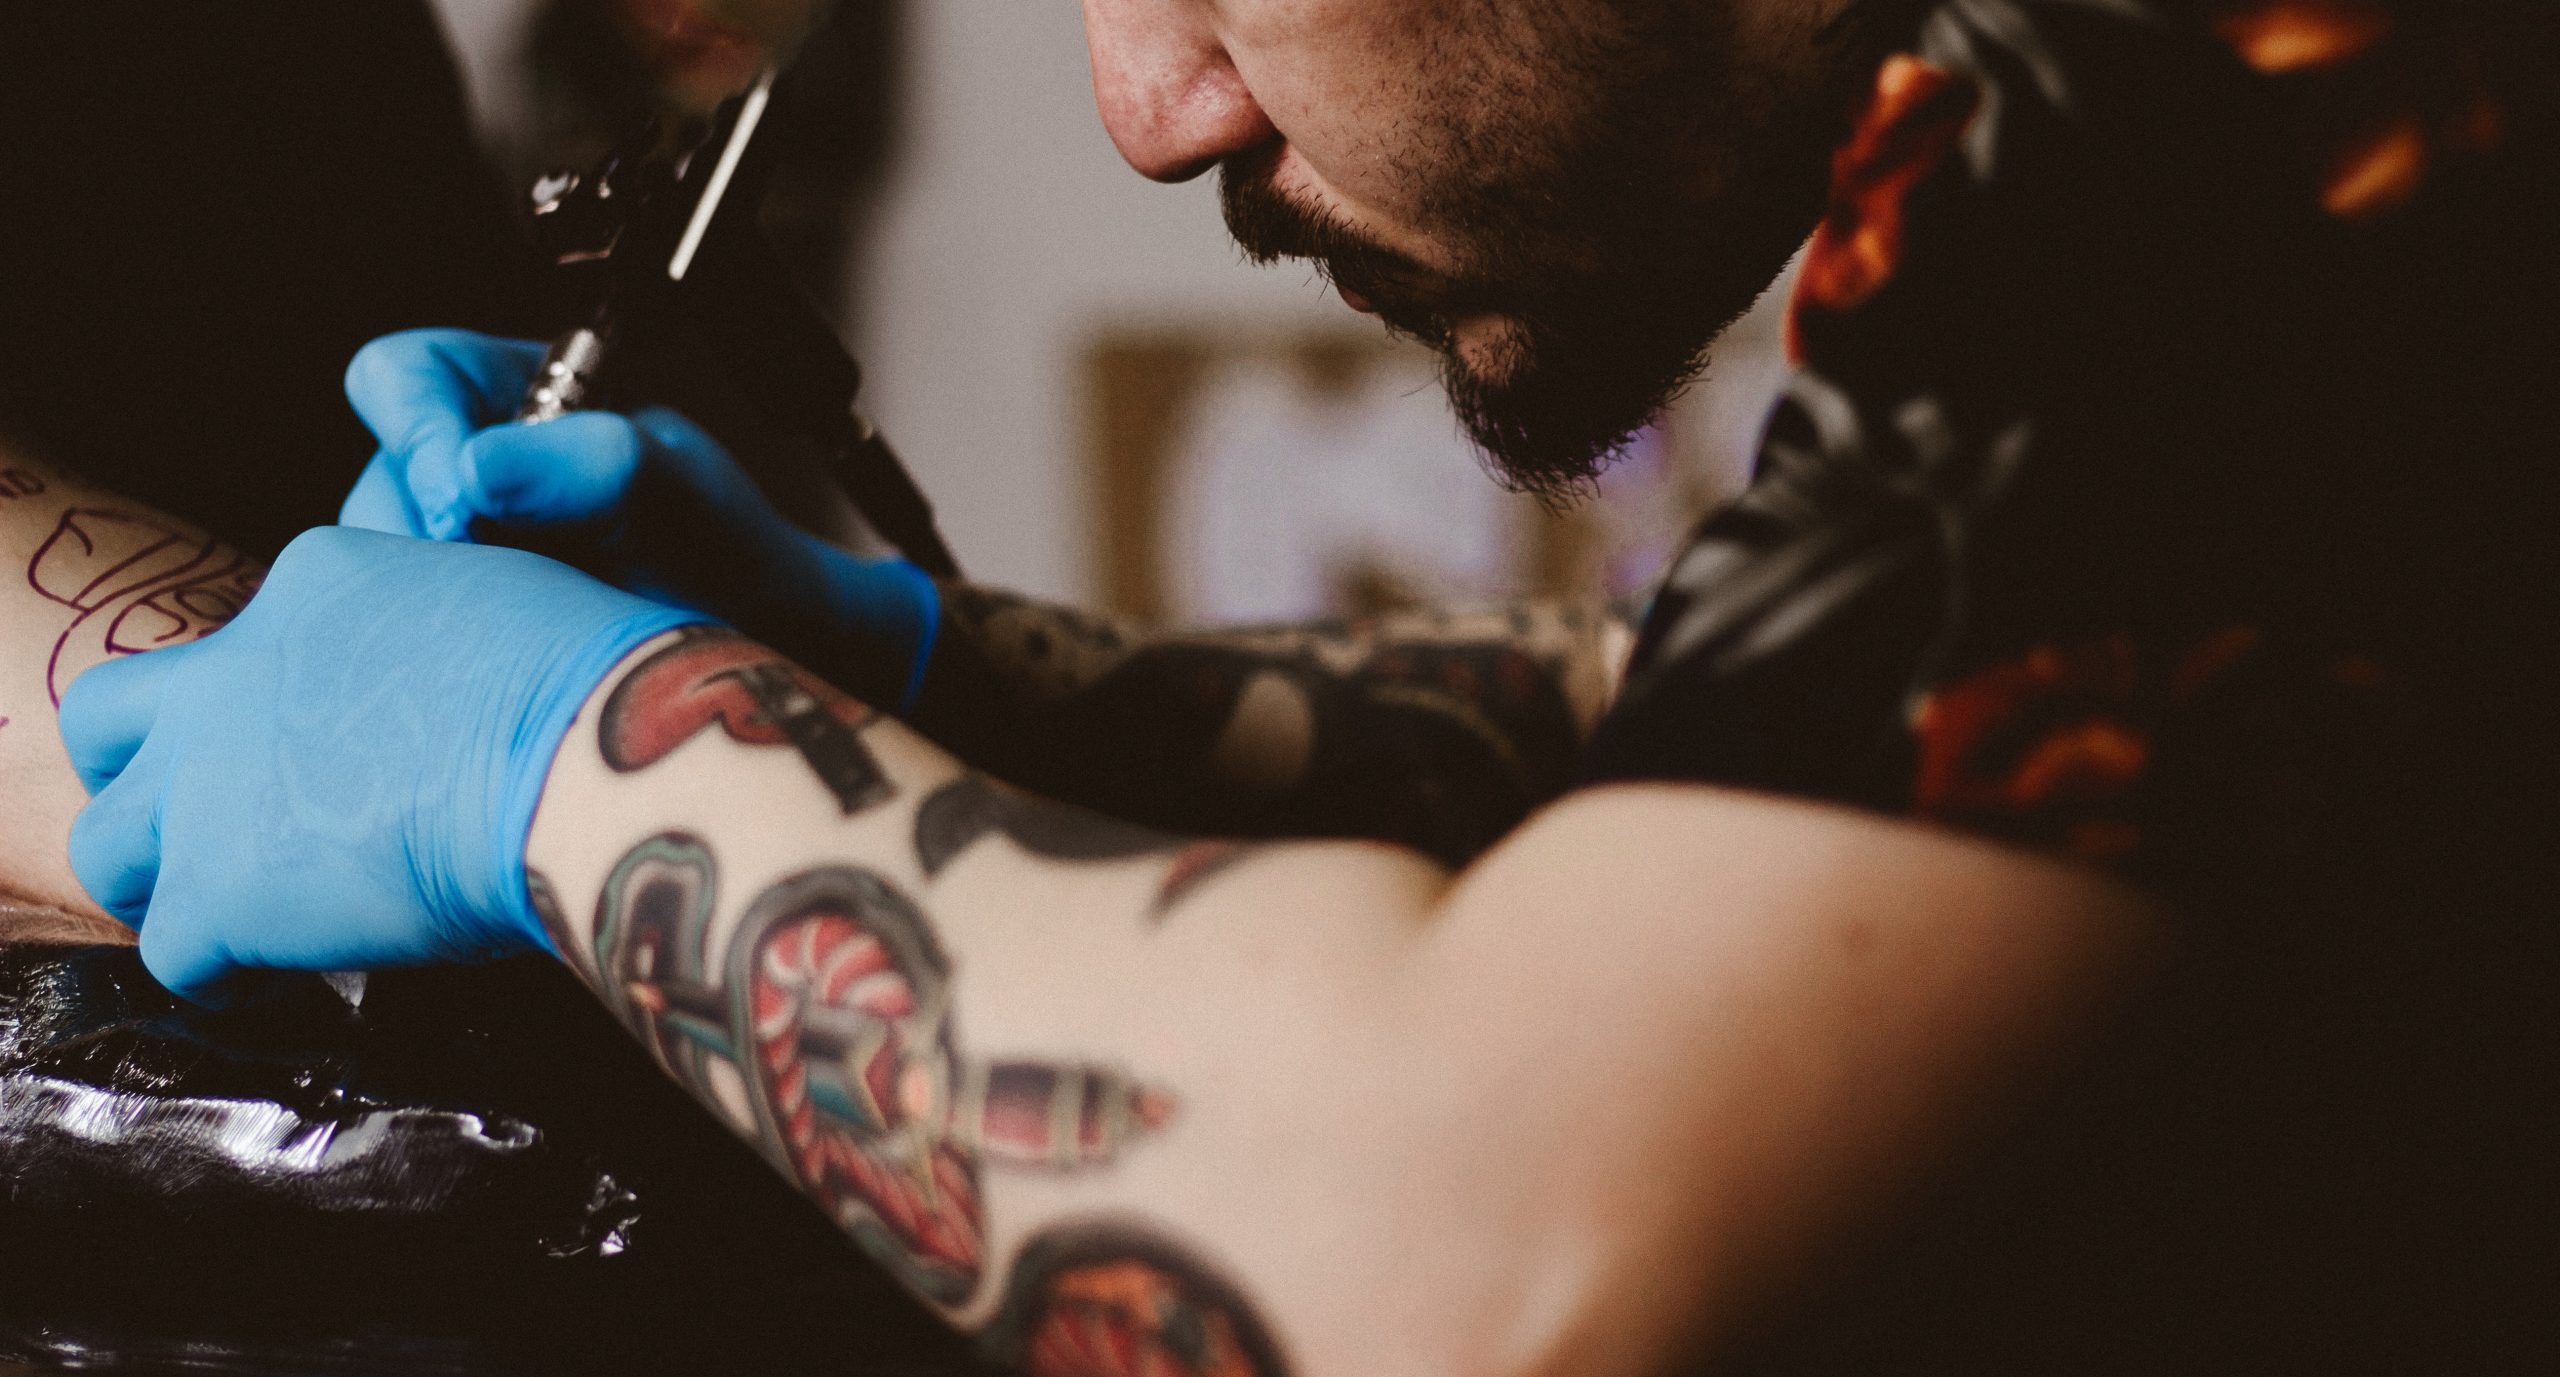 Signs and symptoms of tattoo infection (and what to do about it)